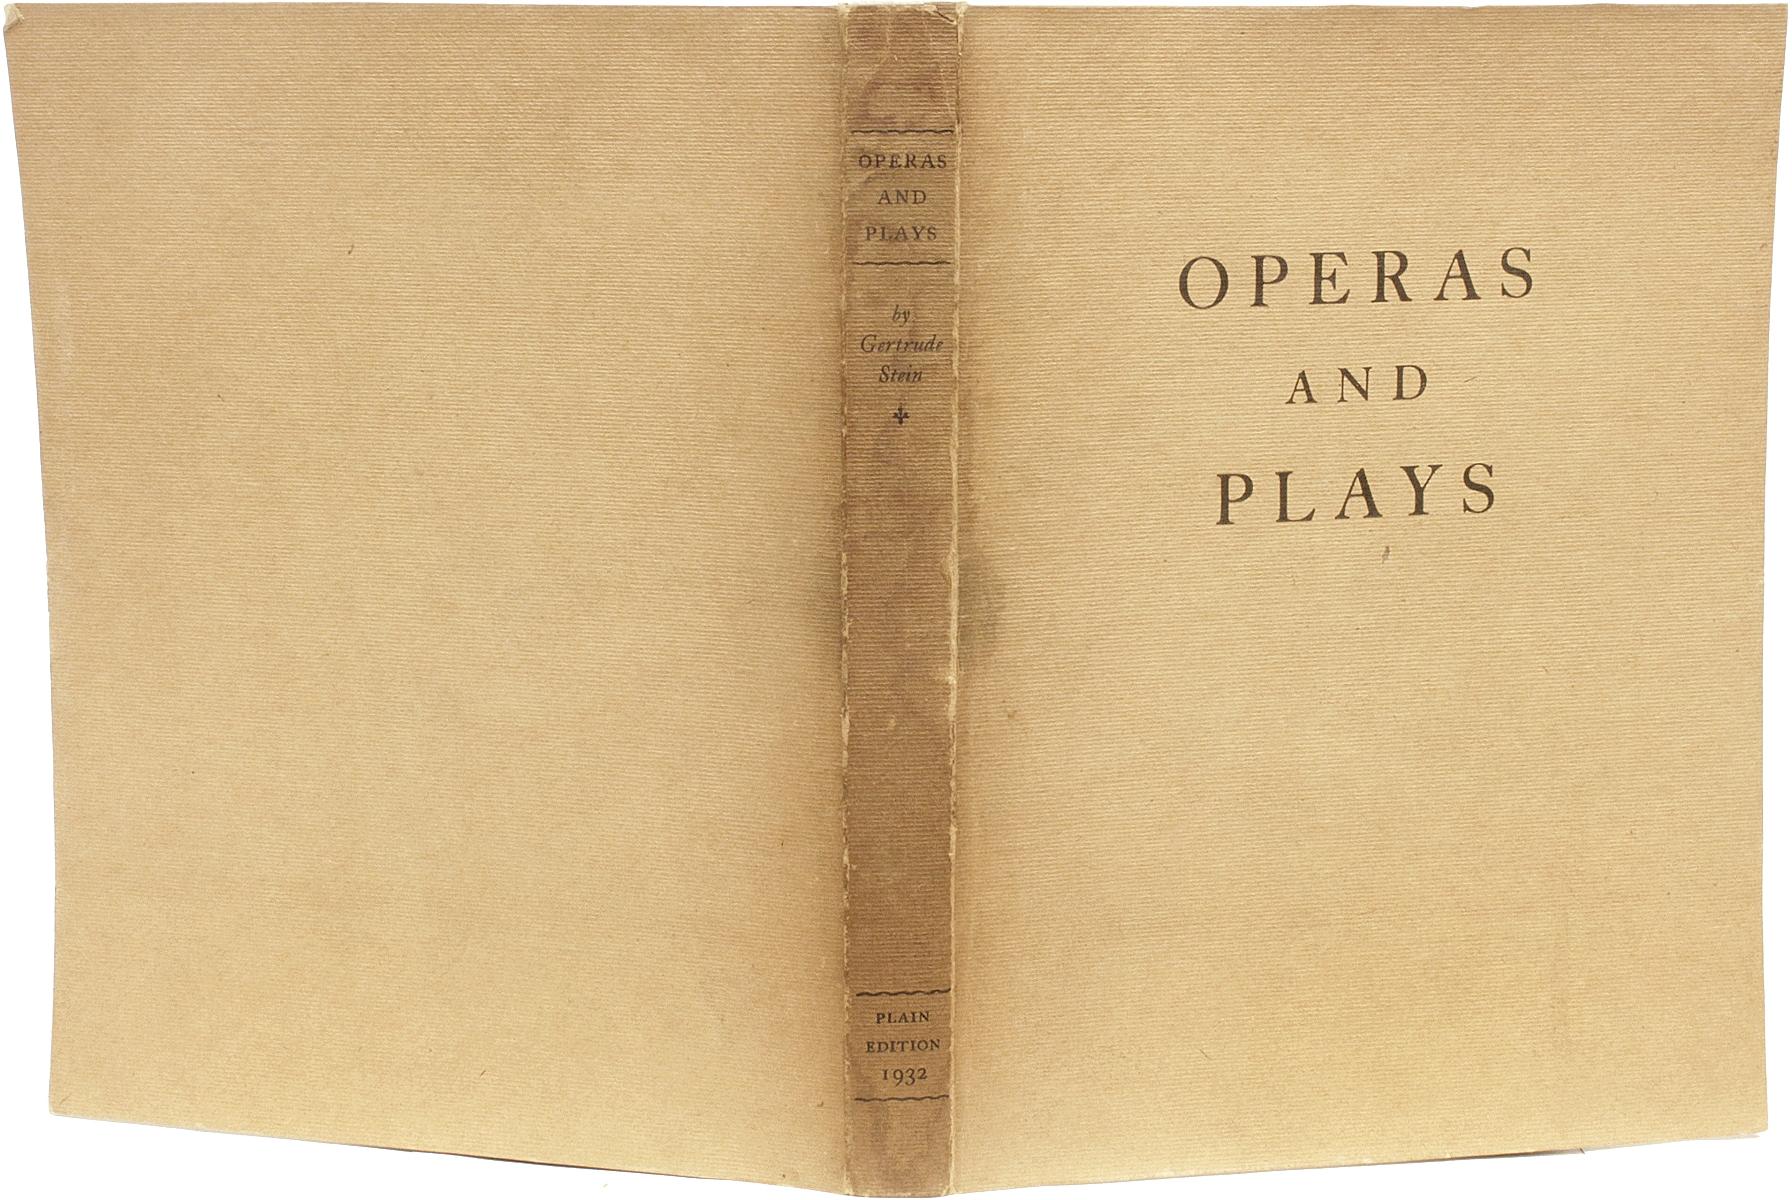 Gertrude Stein, Operas and Plays, Inscribed by Alice Toklas, Plain Edition 1932 In Good Condition For Sale In Hillsborough, NJ